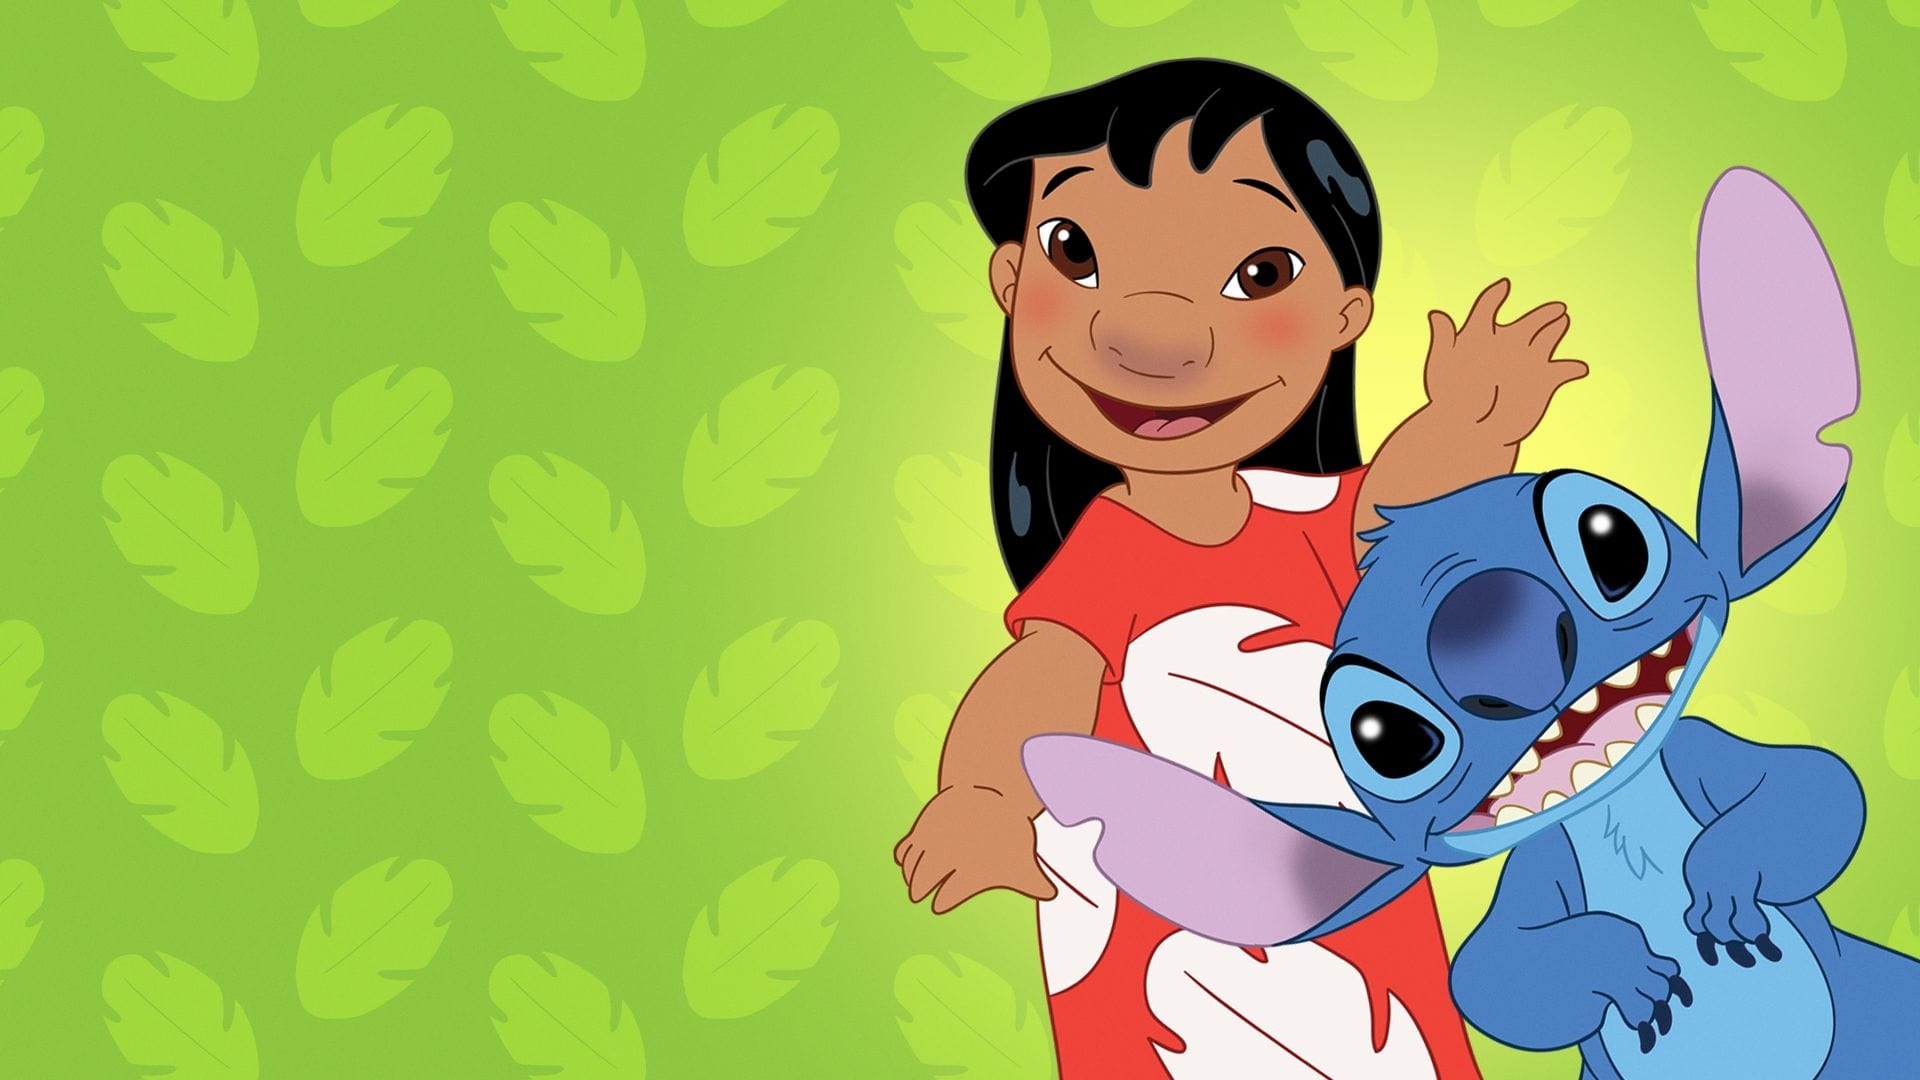 Lilo and Stitch series, Tv series 2003-2006, Backdrops, Movie database, 1920x1080 Full HD Desktop